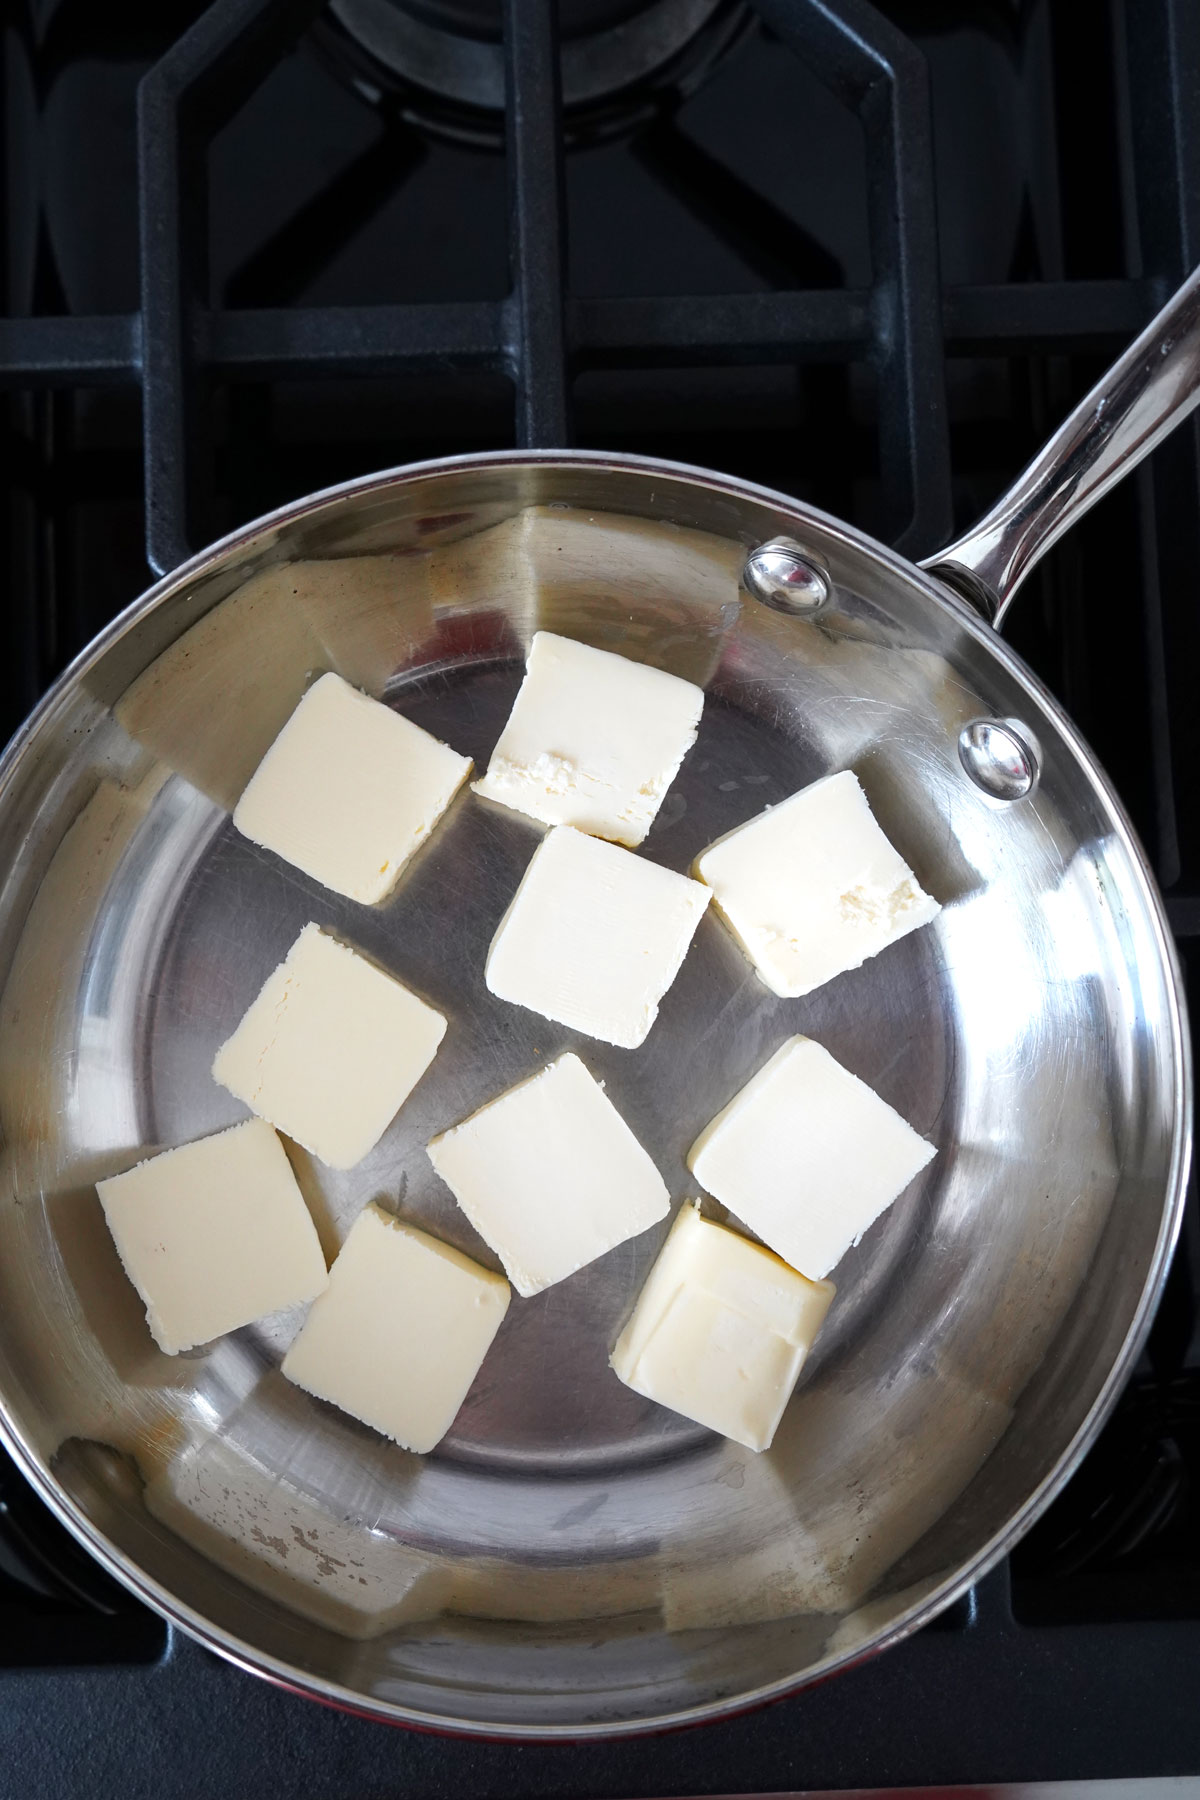 Butter slices spread across the bottom of a stainless steel pan.